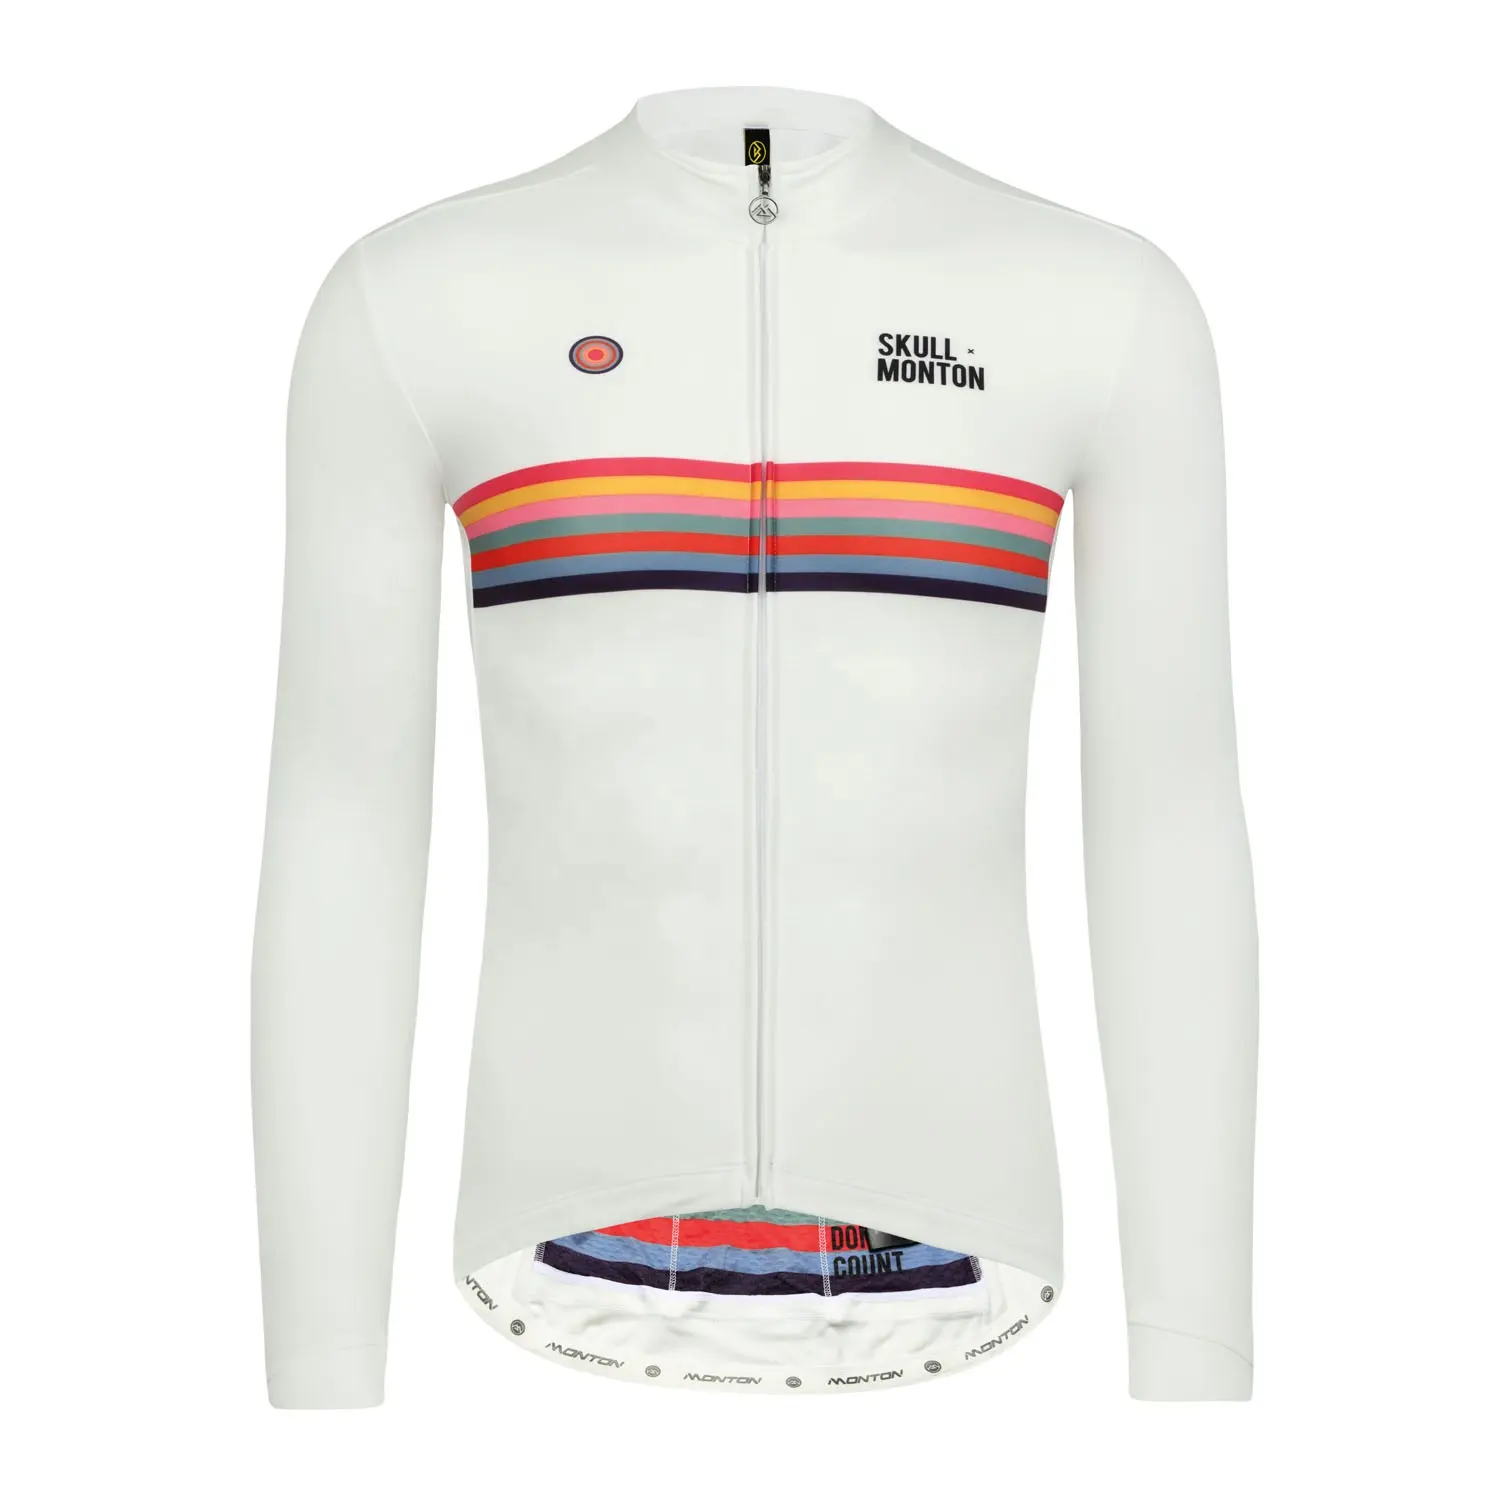 New Arrival Personal Label Racing Team Cycling Fleece Jersey BIke Clothingfor Winter